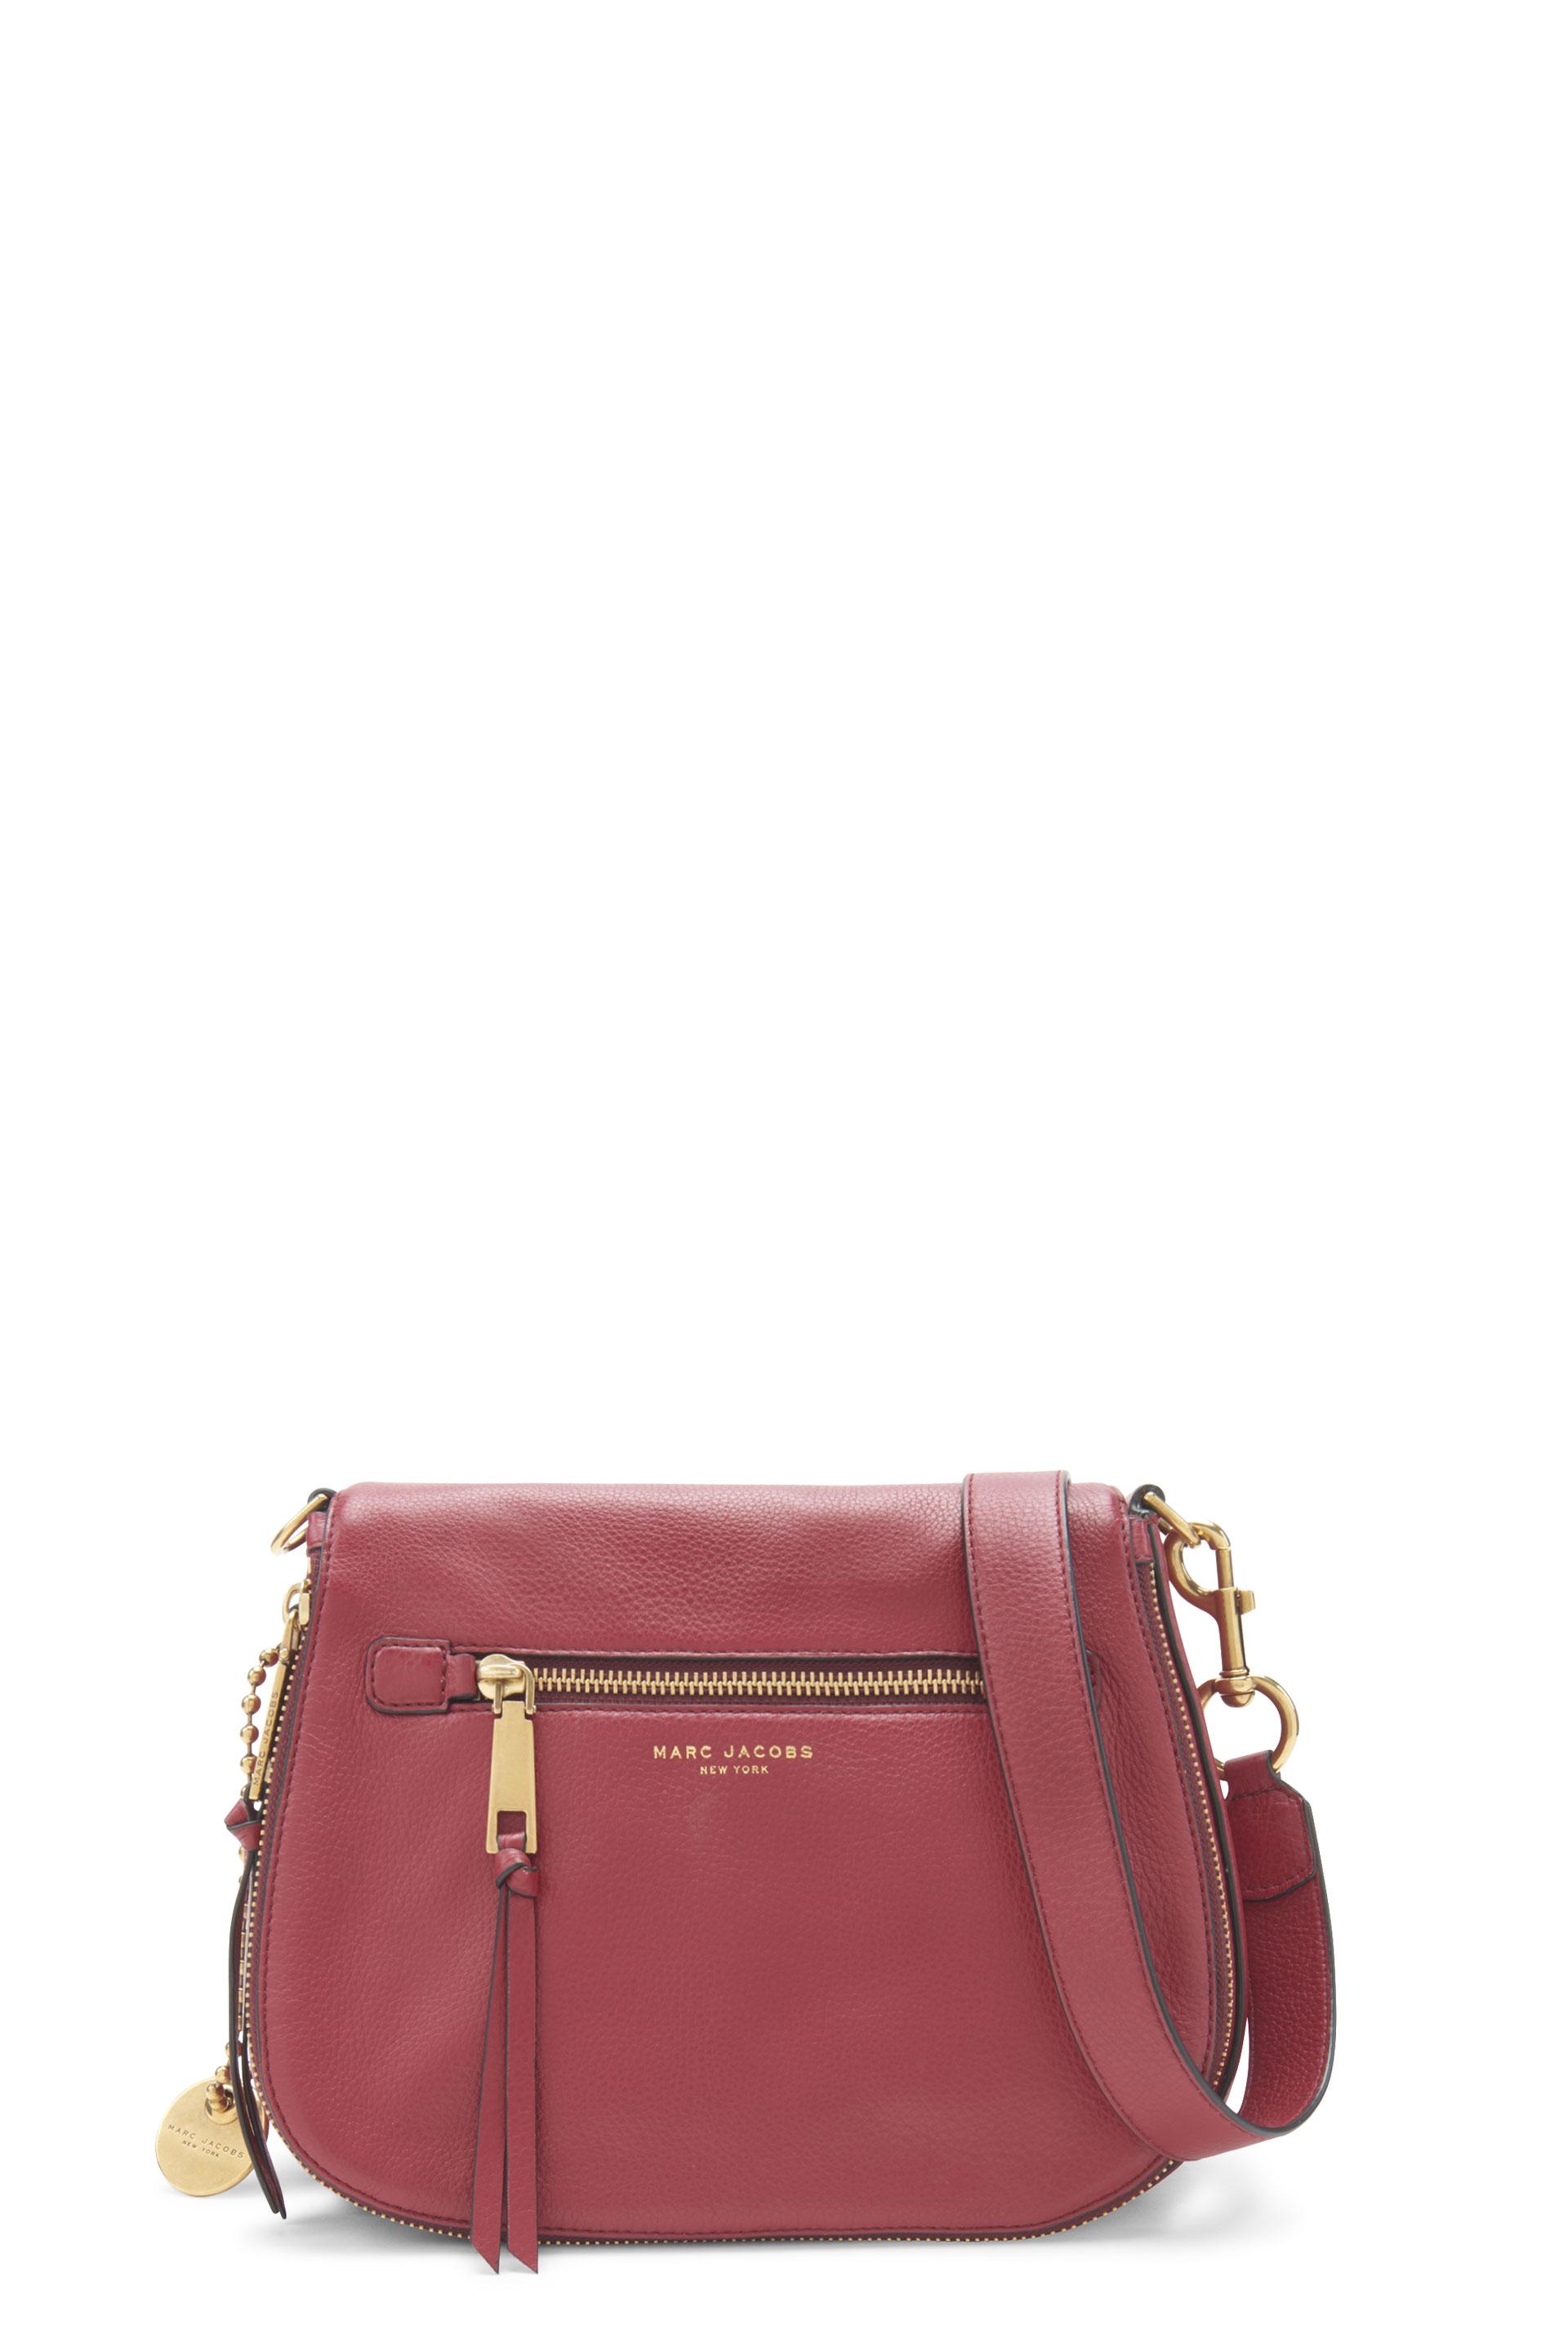 Marc Jacobs Recruit Saddle Bag In Ruby Rose | ModeSens